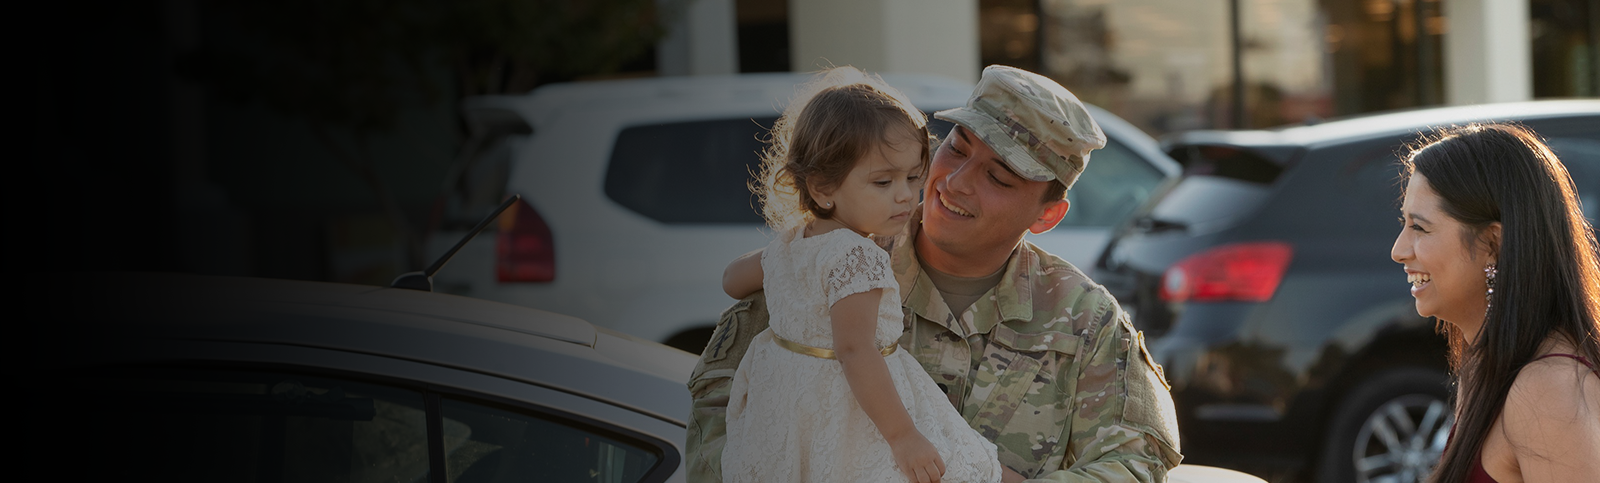 Military male holding his daughter in his arms as his wife smiles.